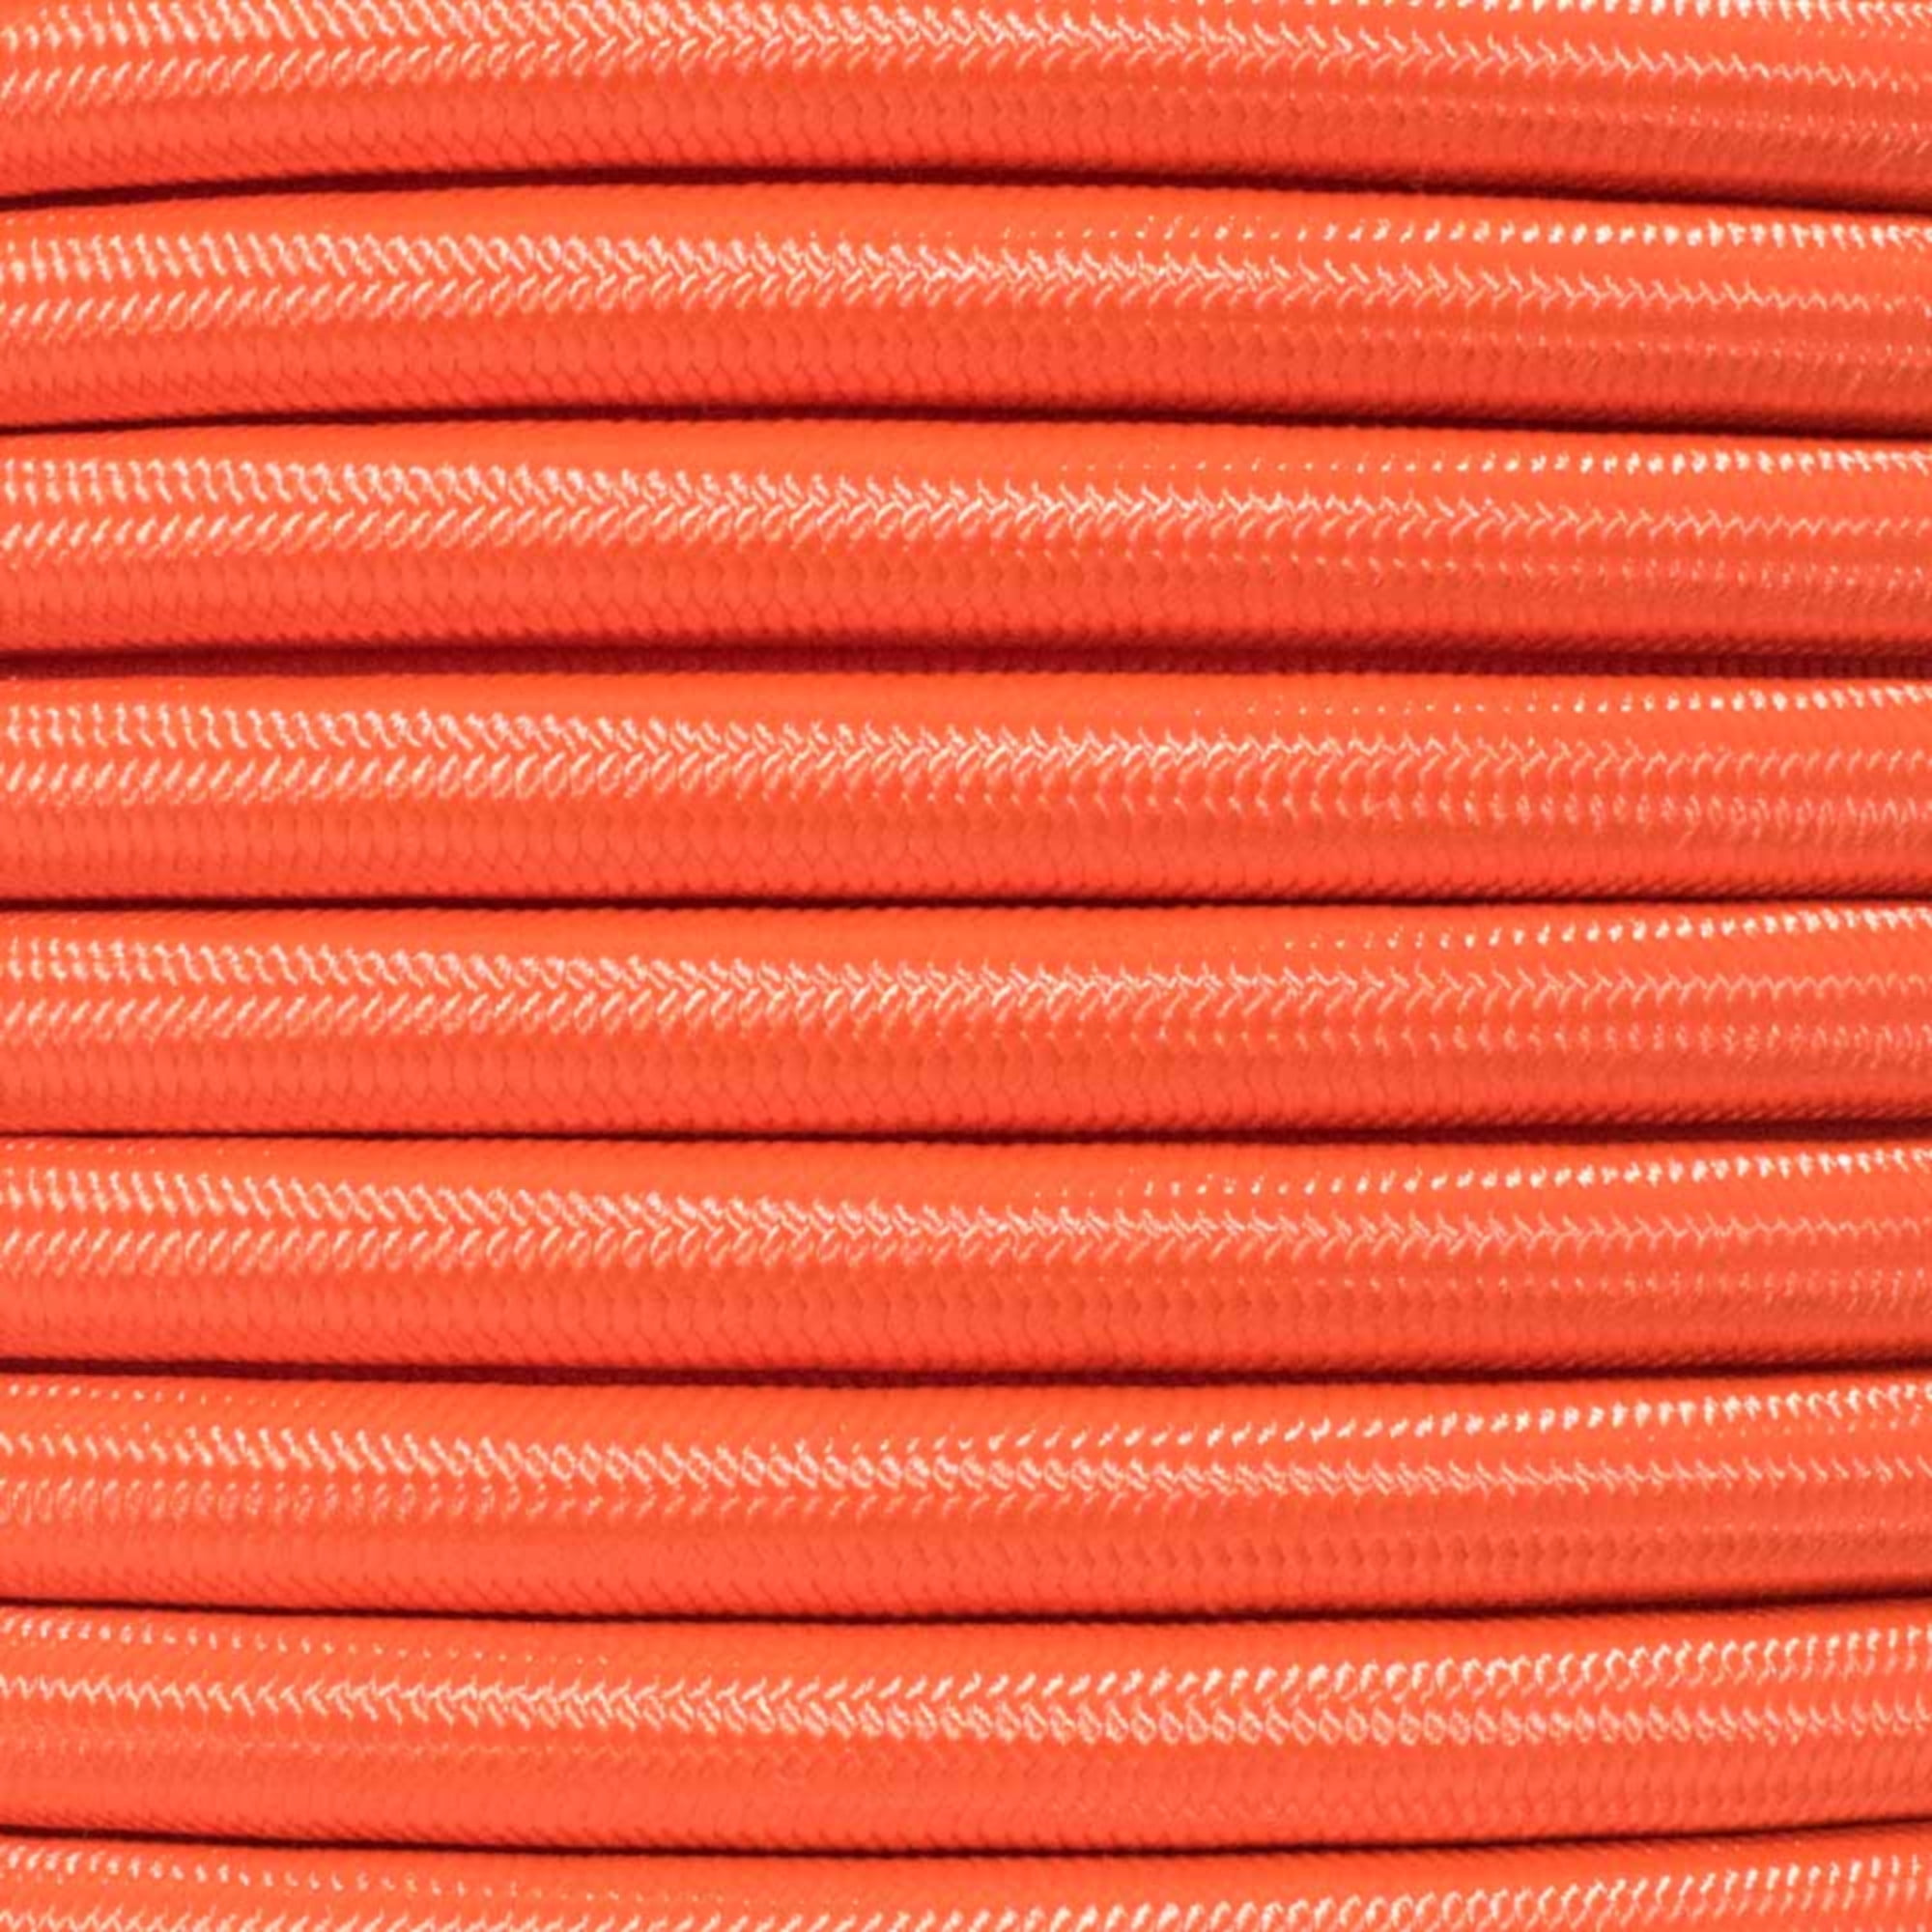 Boating Heavy Duty Cordage for Kayaking DIY Projects Paracord Planet Bungee Cords Elastic Shock Cord Tie Downs Elastic Straps 